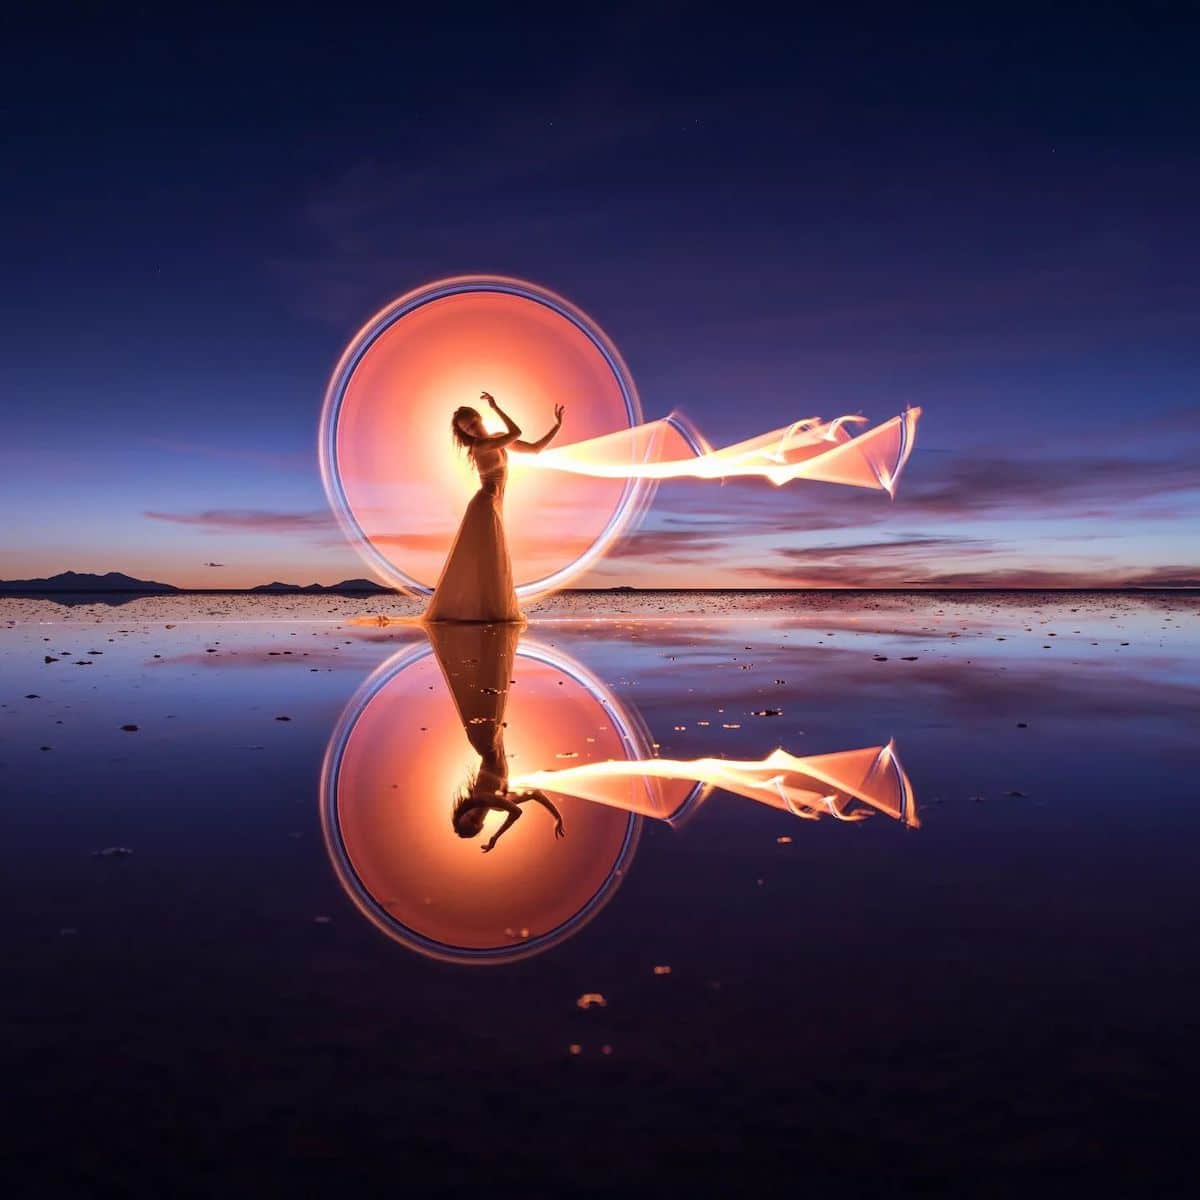 Light painting with contemporary dancer Kim Henry